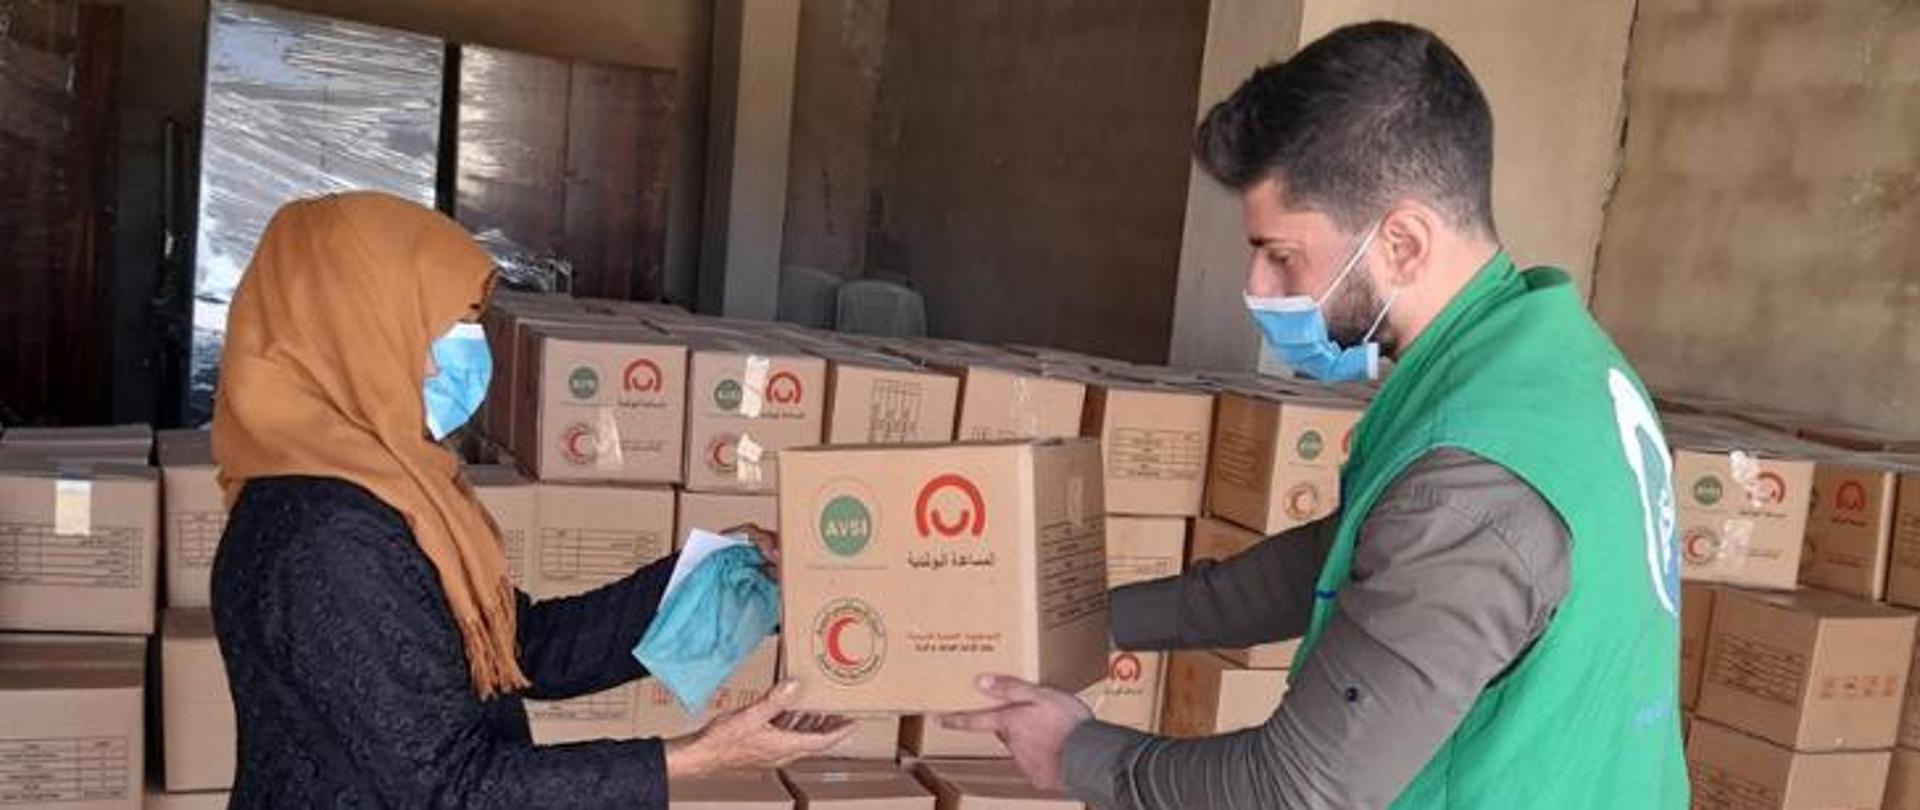 Supporting Syrians in response to the COVID-19 pandemic